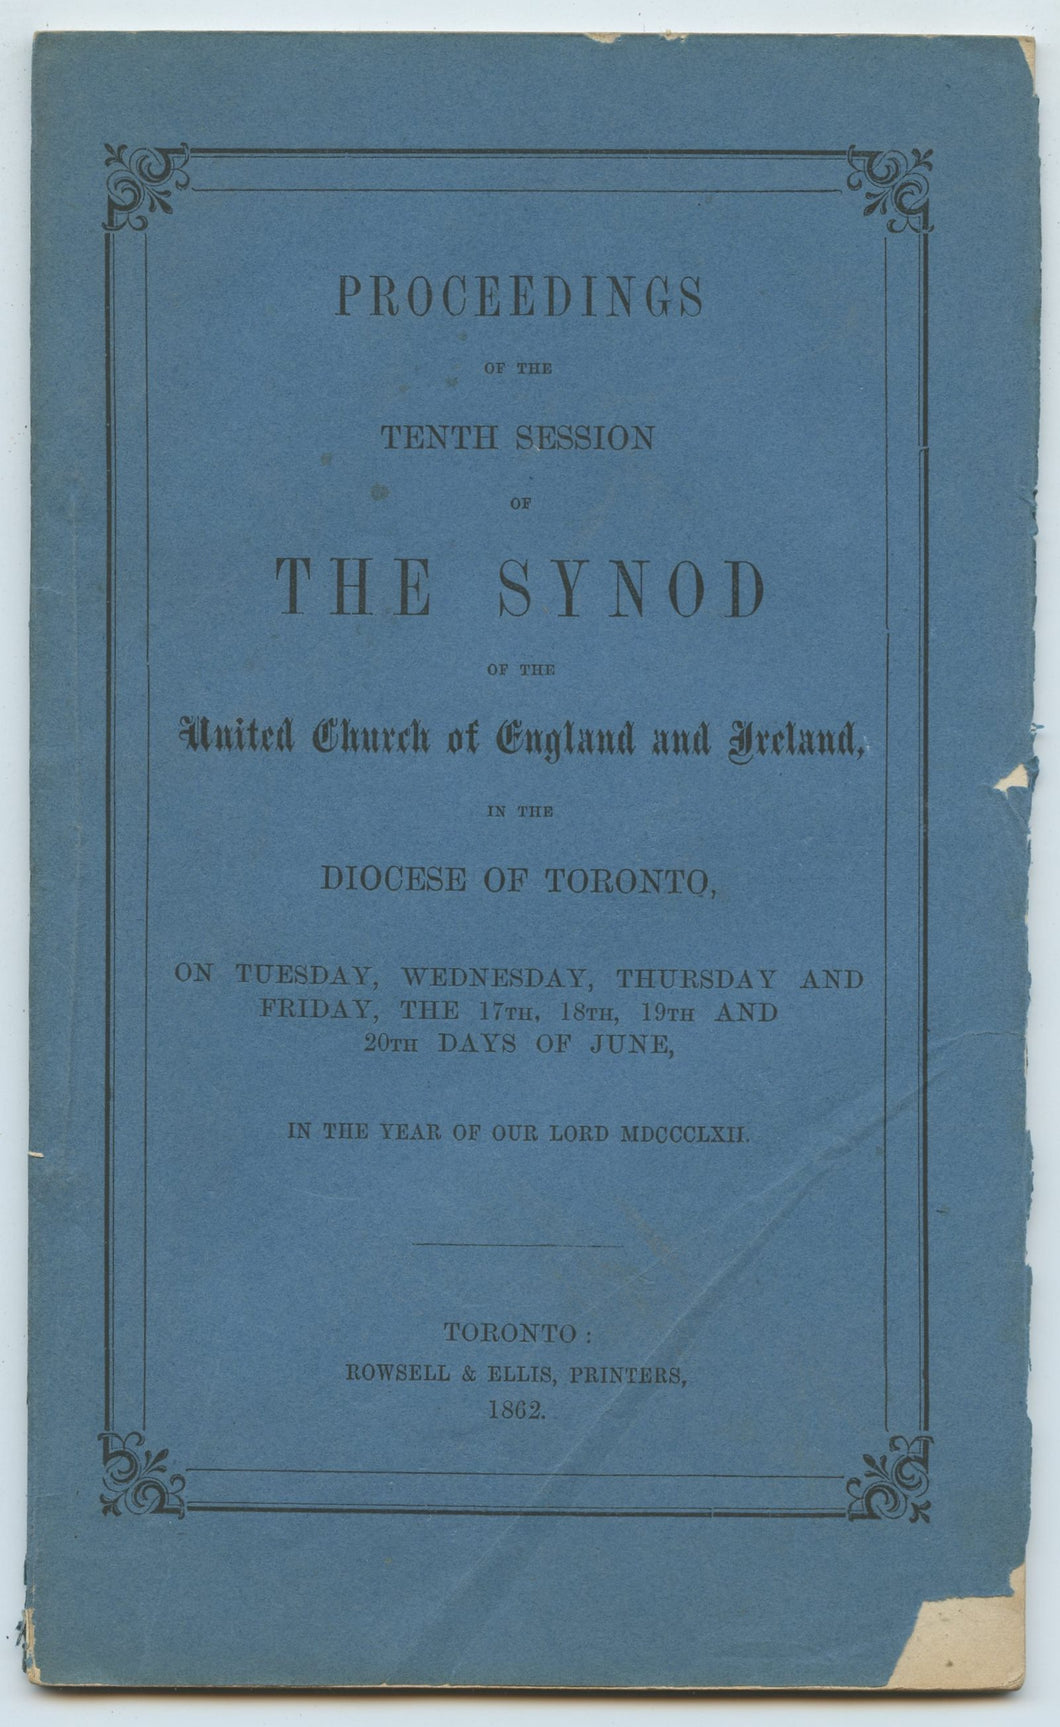 Proceedings of the Tenth Session of The Synod of the United Church of England & Ireland in the Diocese of Toronto, on Tuesday, Wednesday, and Thursday, the 17th, 18th, 19th and 20th Days of June, in the Year of Our Lord MDCCCLXII